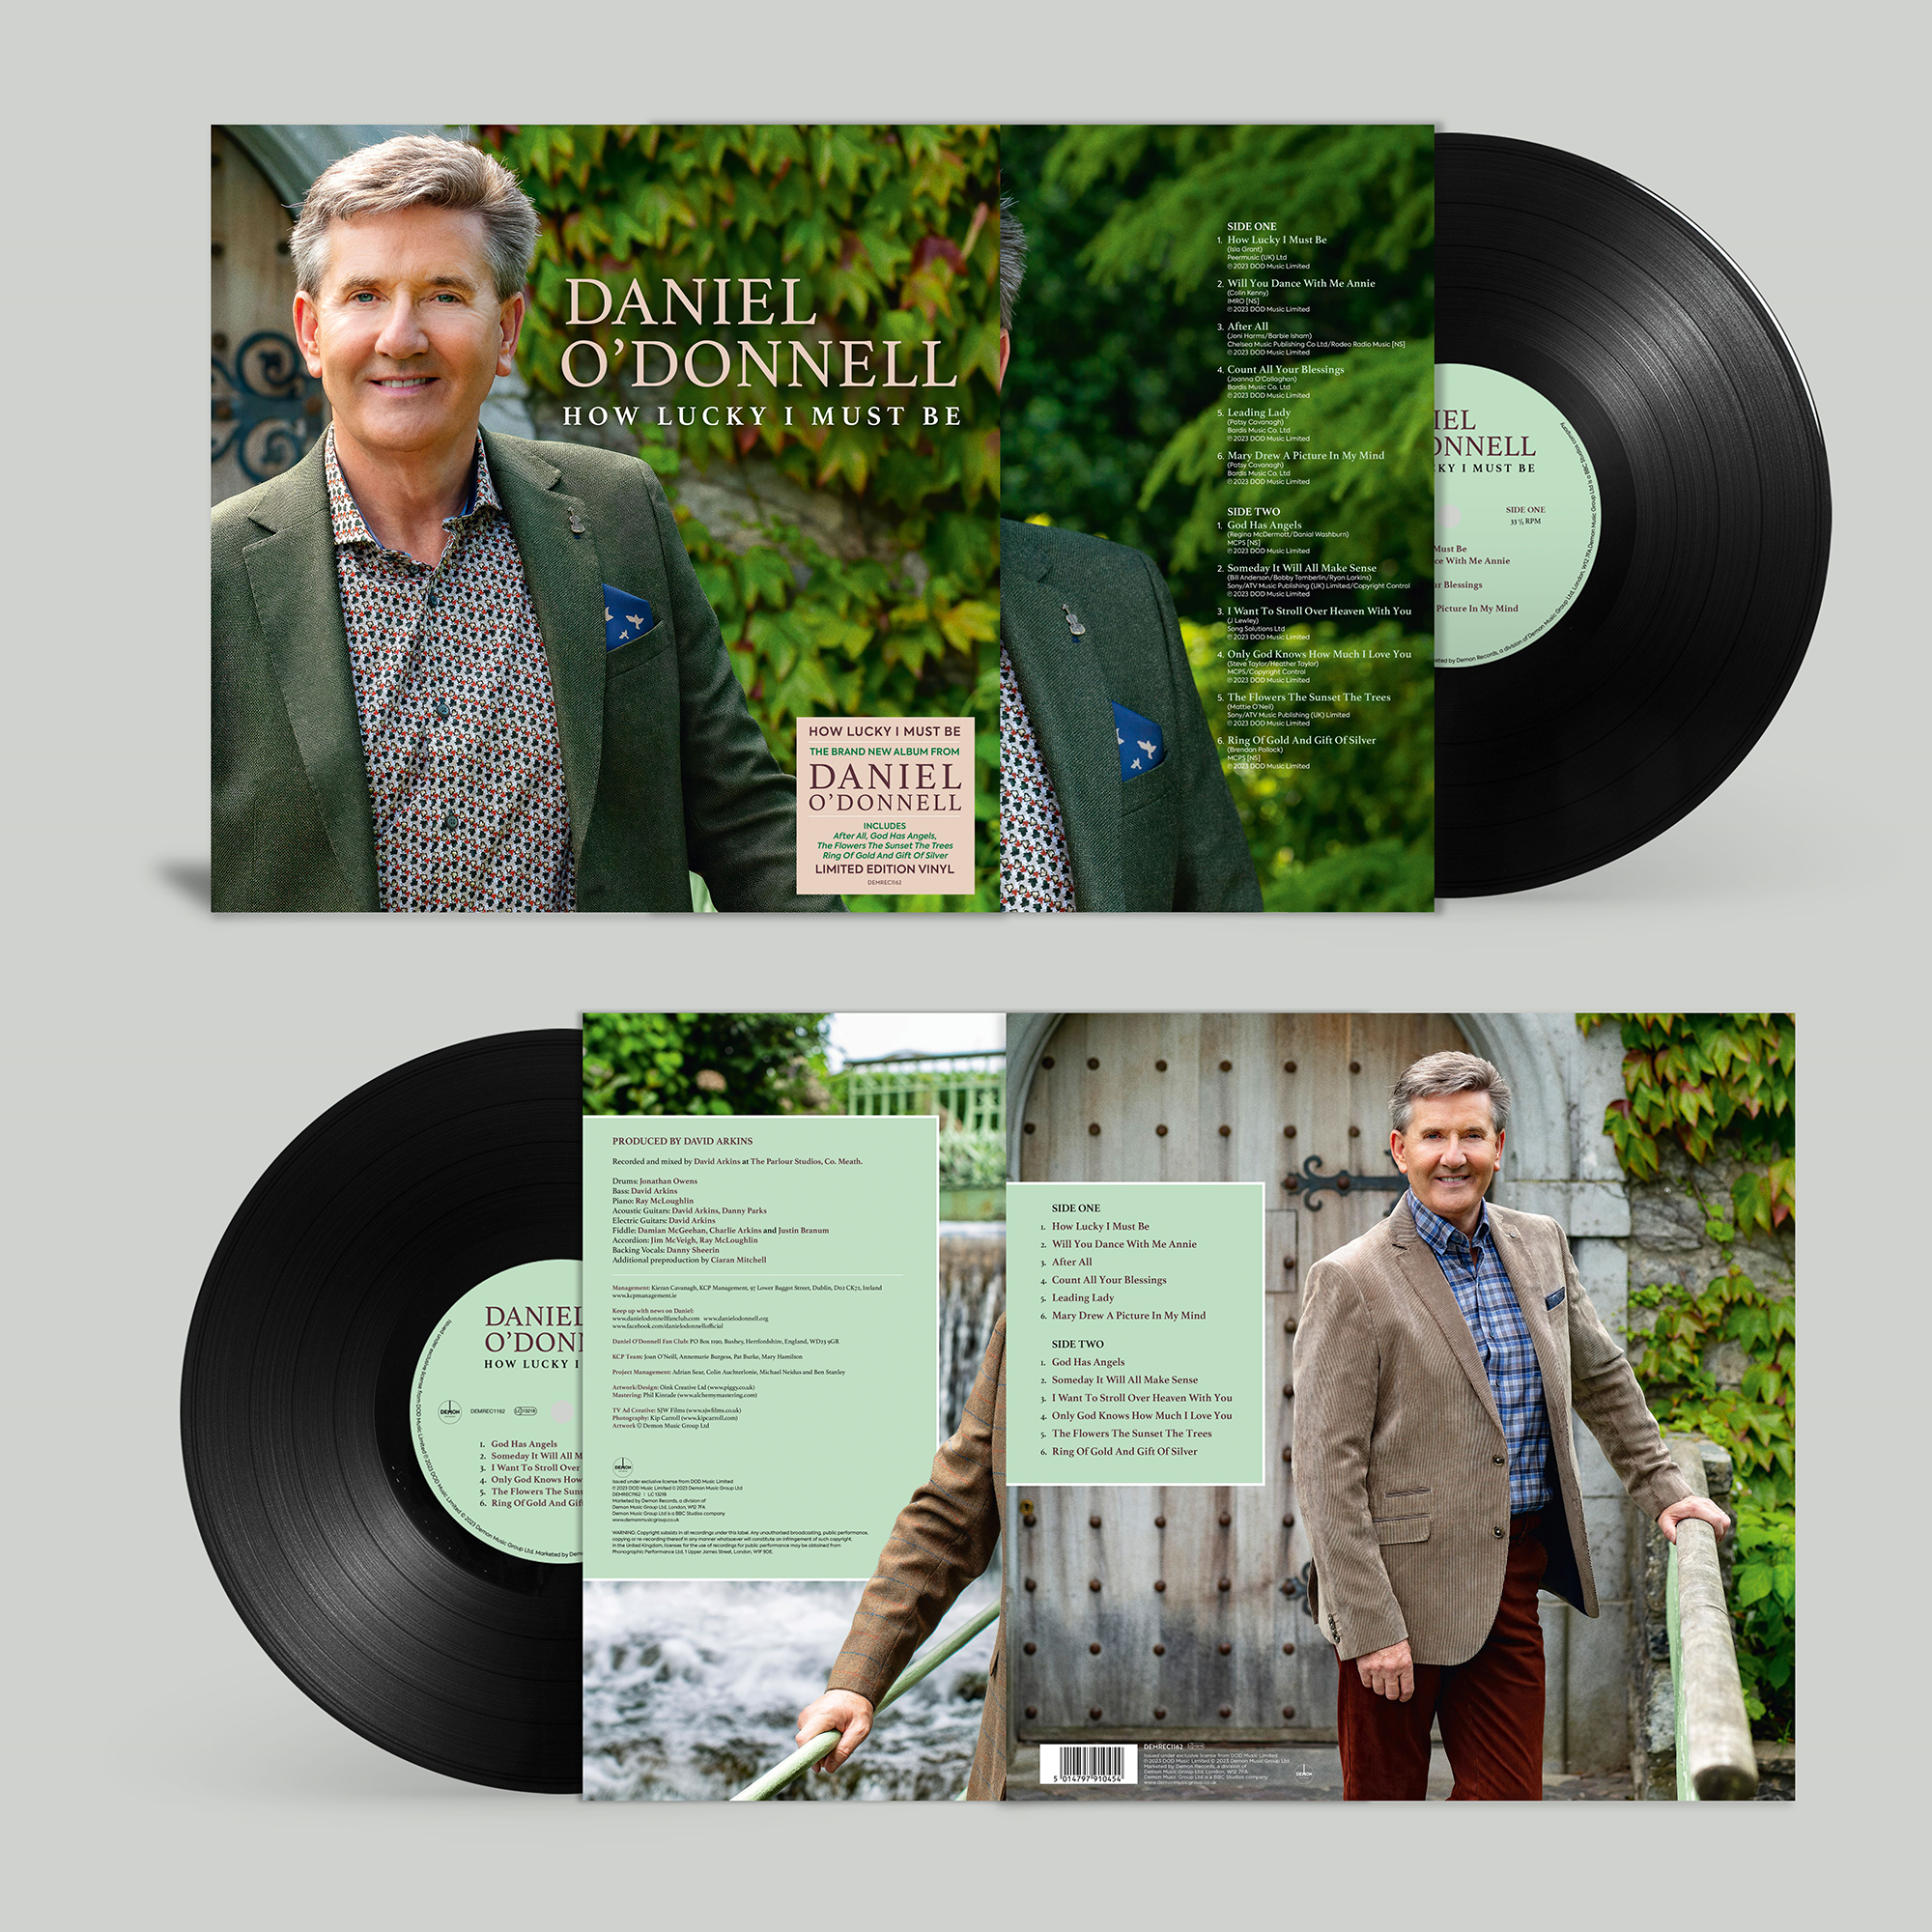 Daniel O'Donnell - How Lucky I Must Be: Vinyl LP